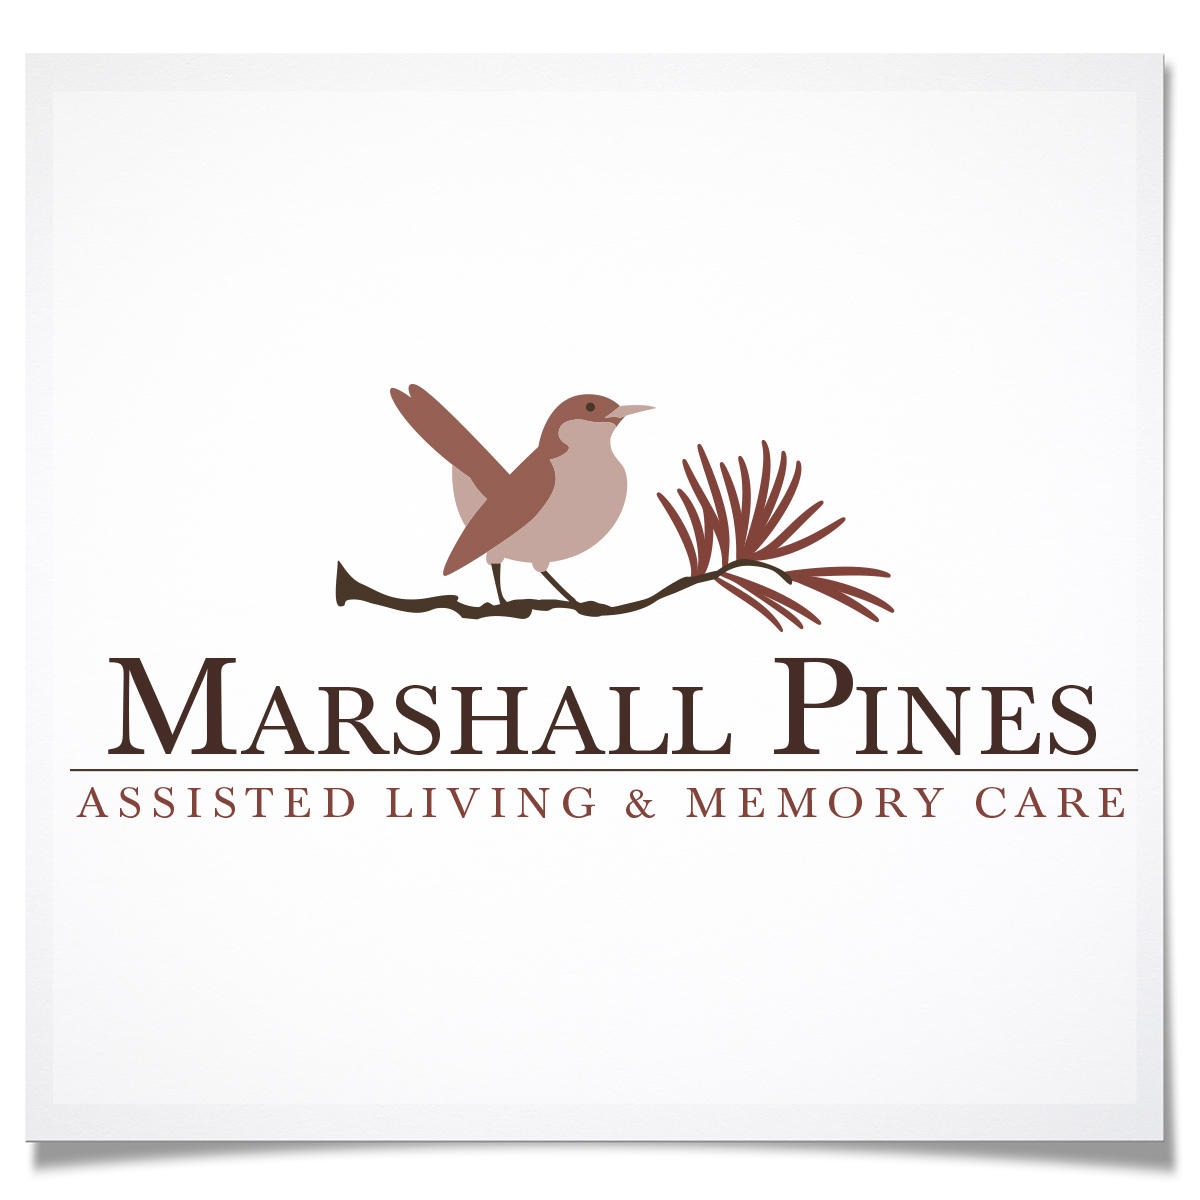 Marshall Pines Assisted Living & Memory Care Logo